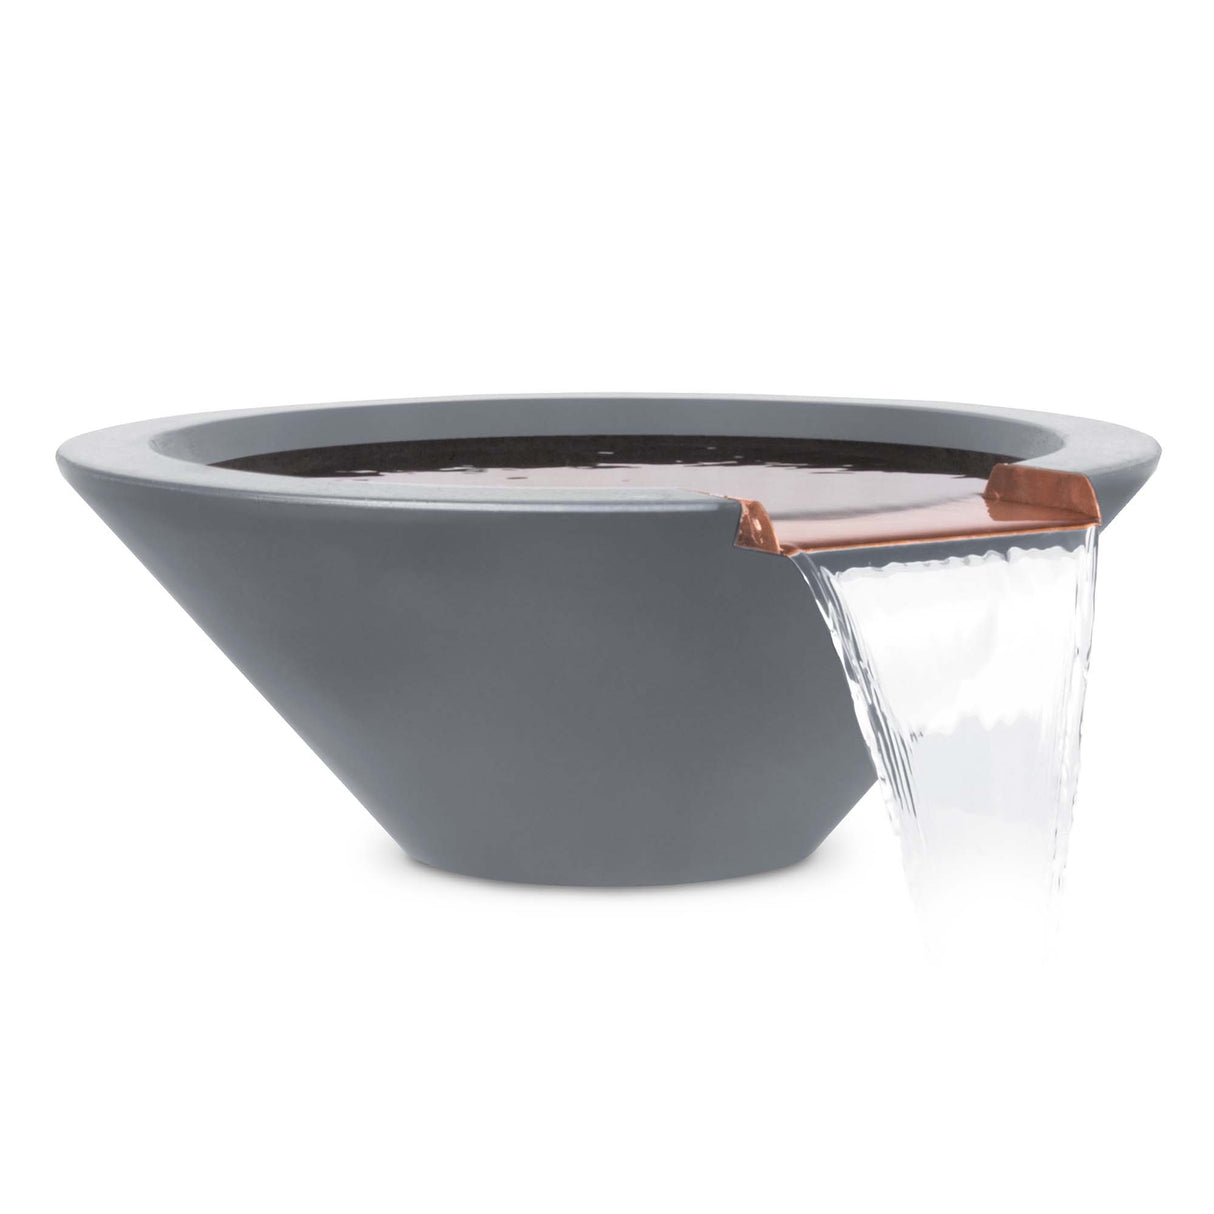 The Outdoor Plus Cazo Concrete Water Bowls